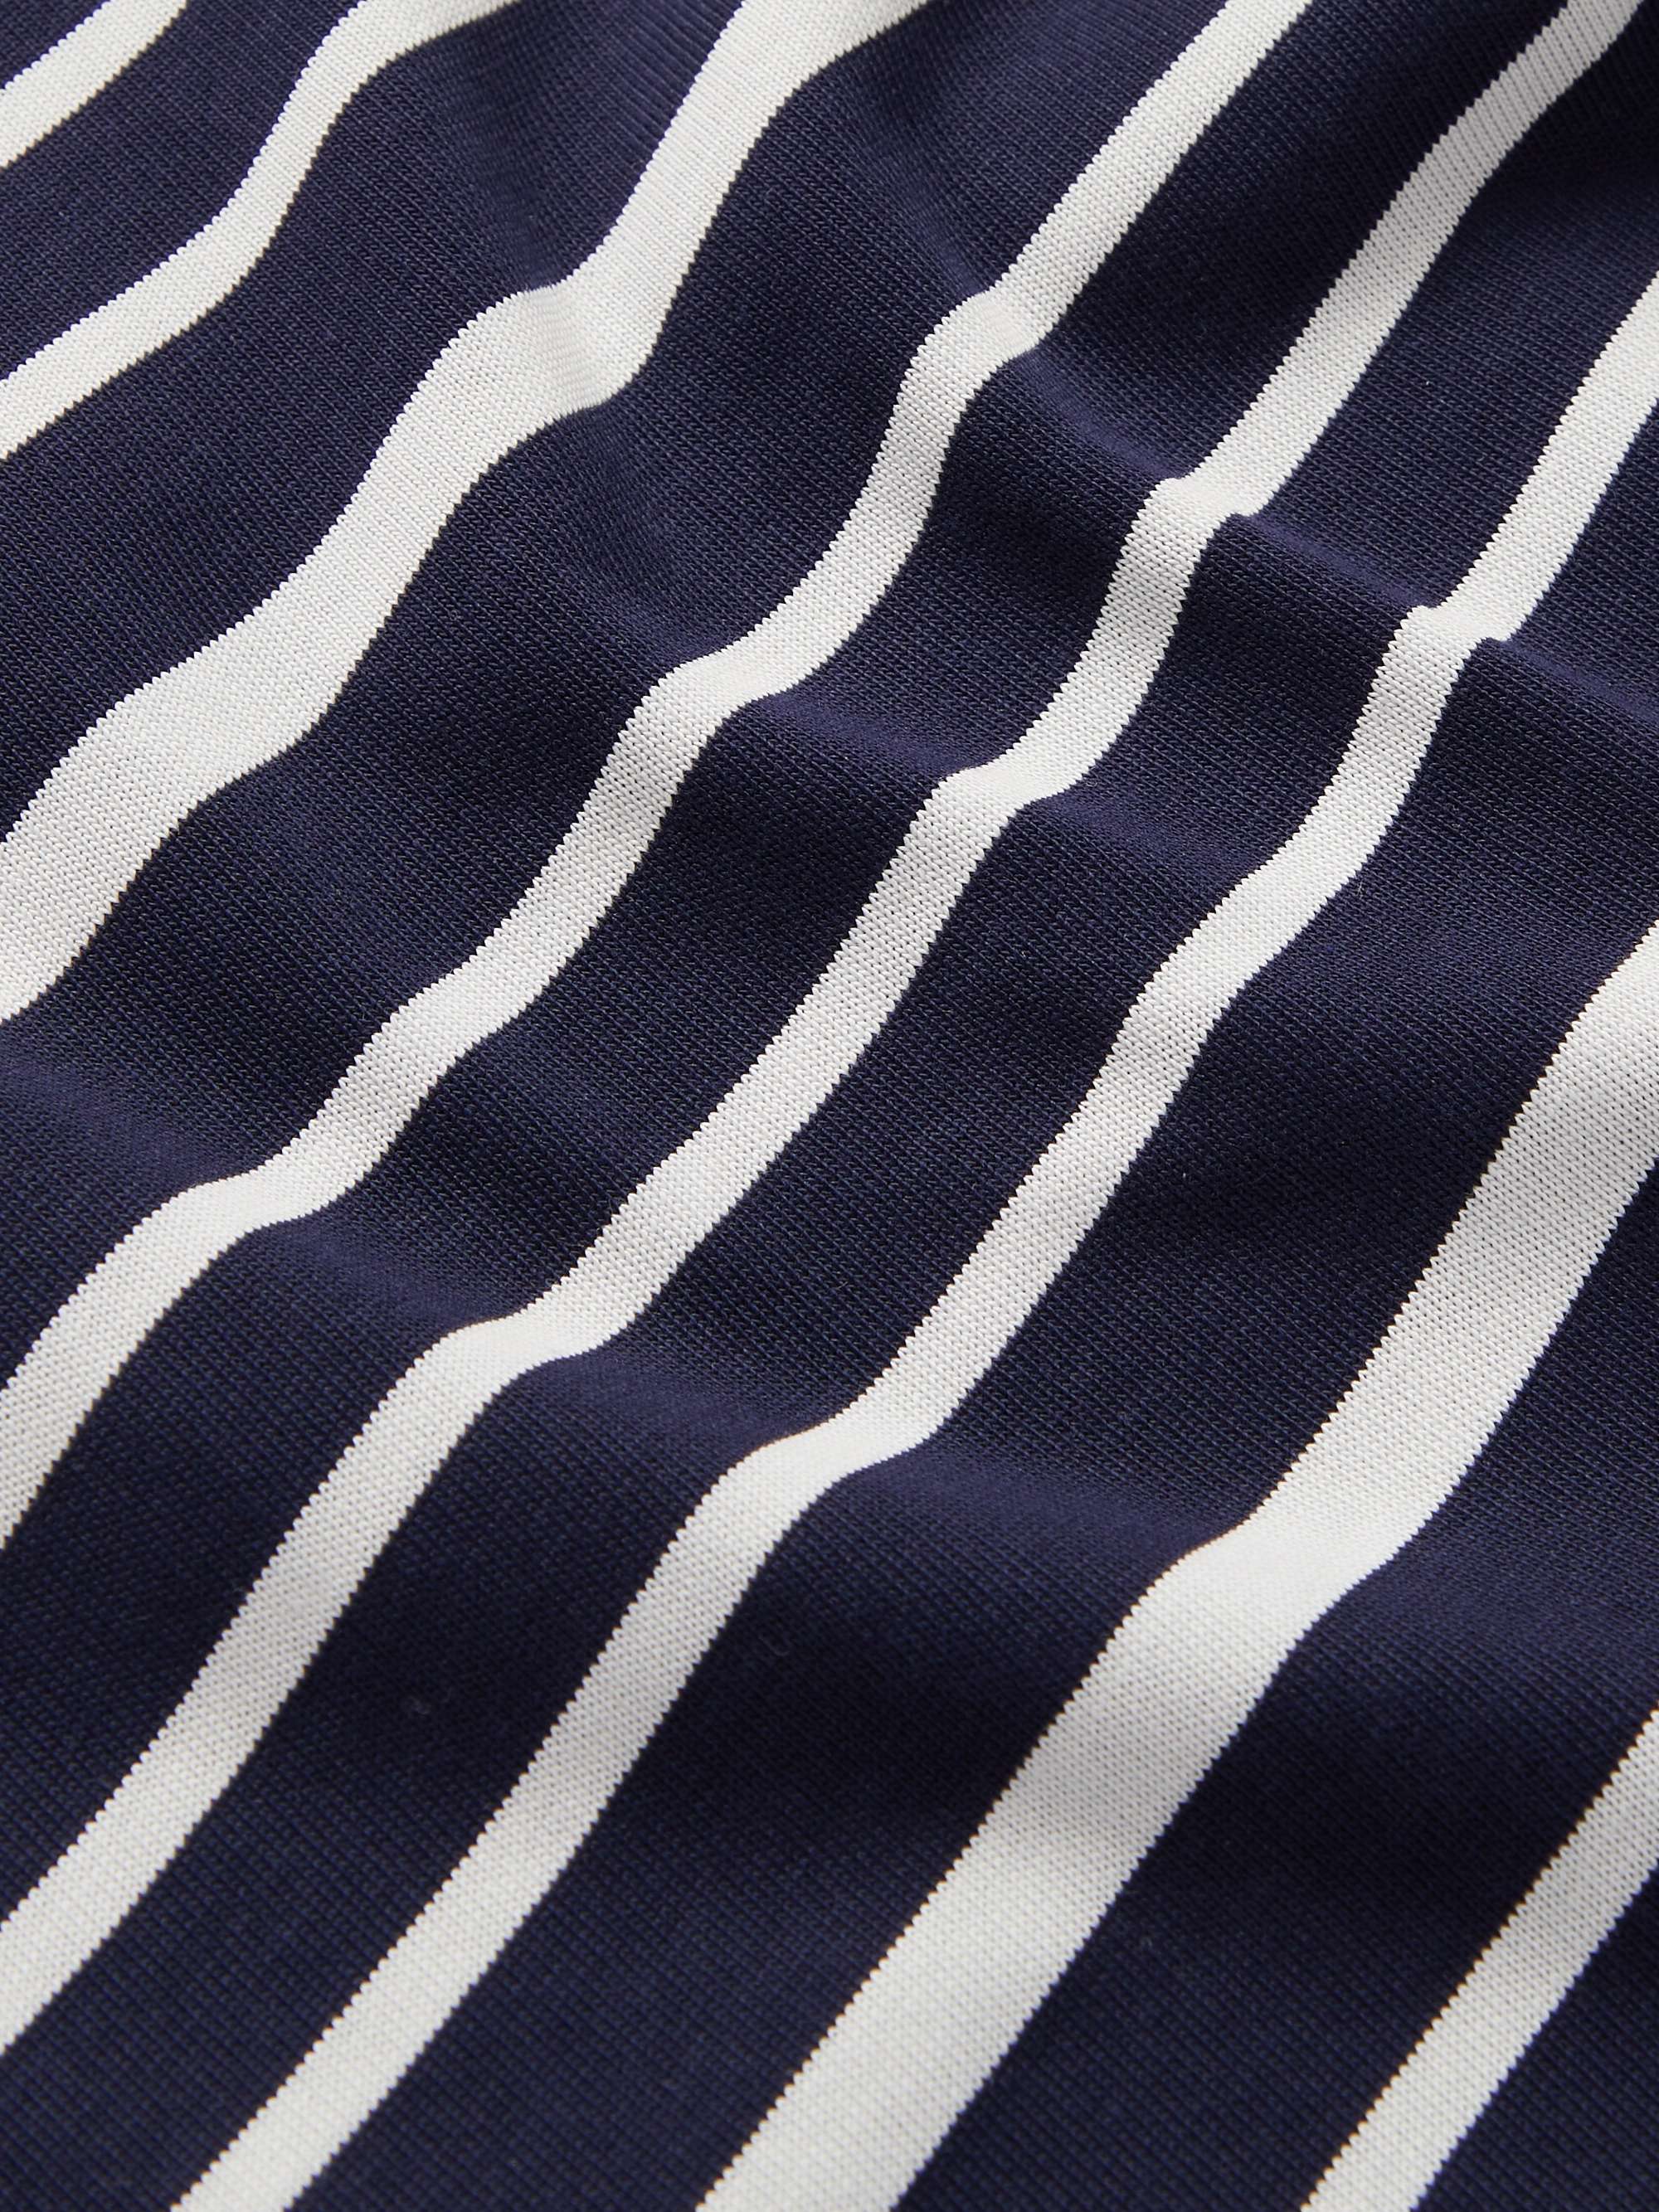 NORSE PROJECTS Johannes Striped Cotton-Jersey T-Shirt